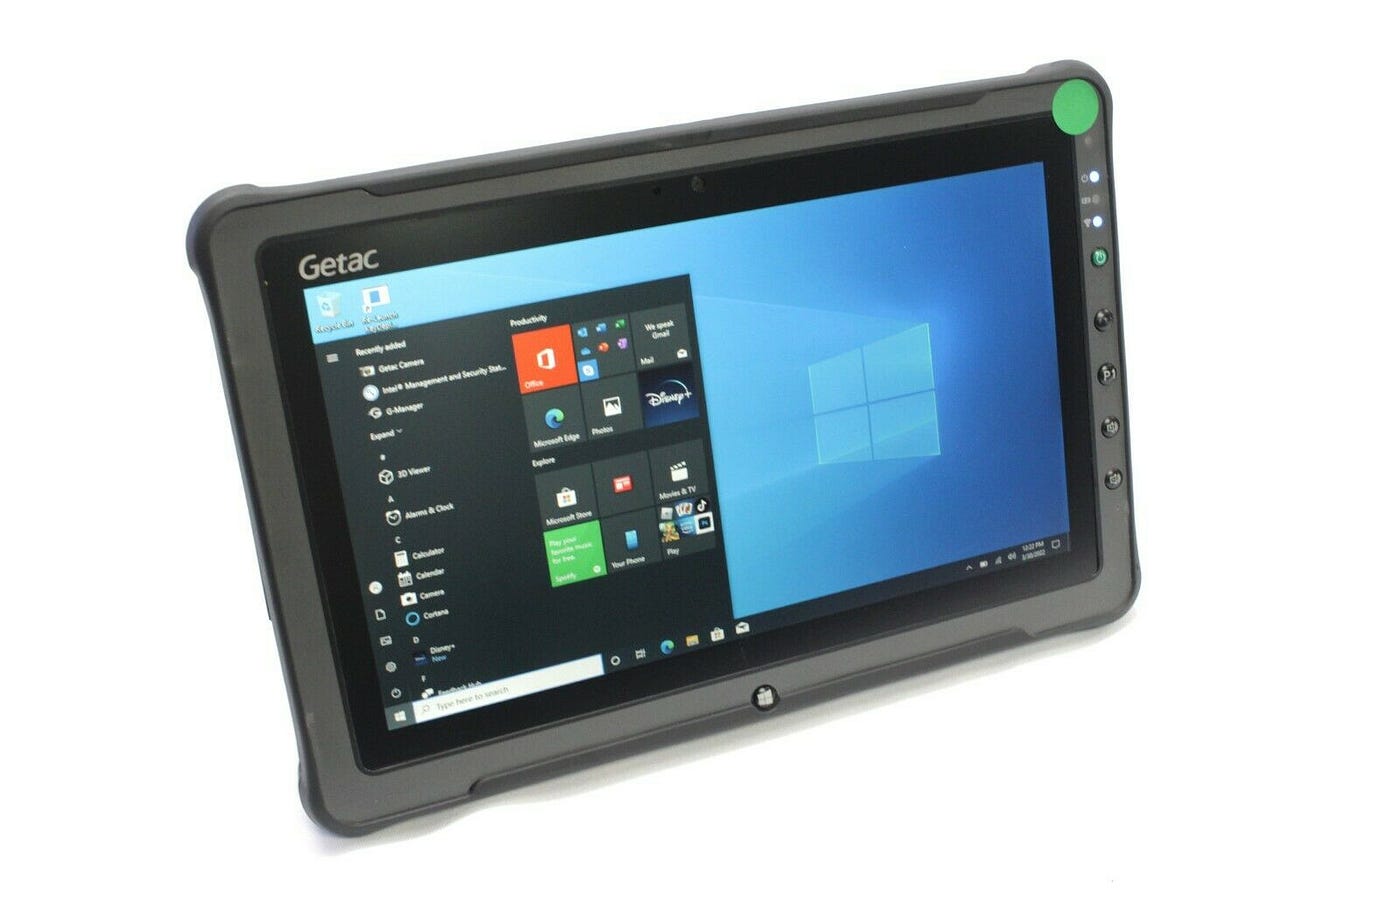 Getac Tablet computer PC s Feature and Performance | by Dina g johnson |  Medium